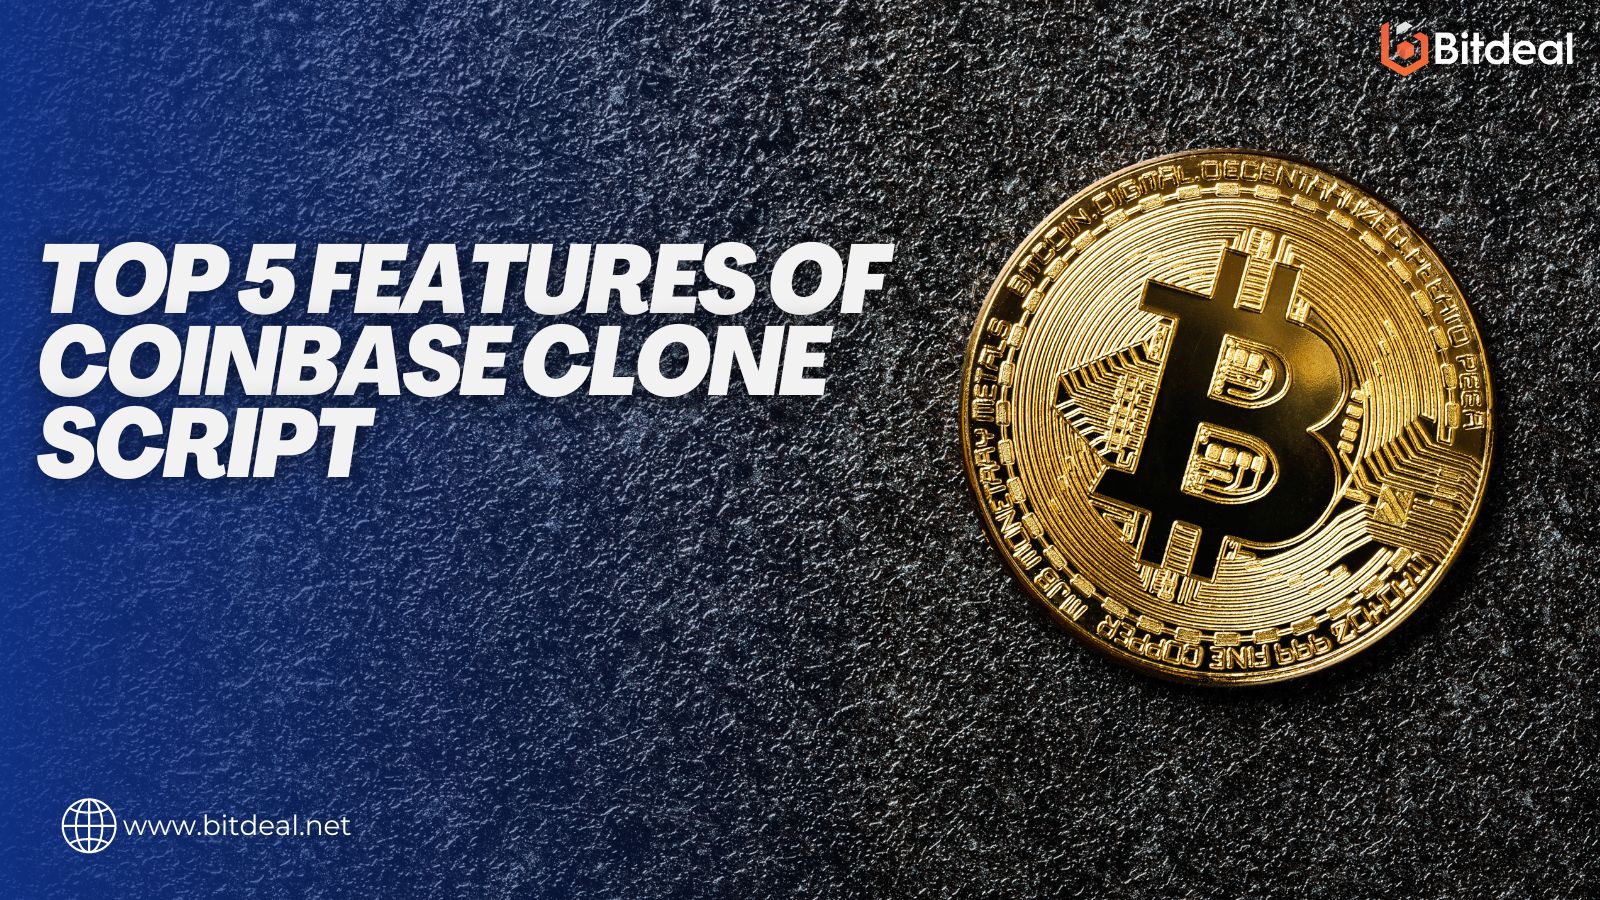 Top 5 features of Coinbase clone script